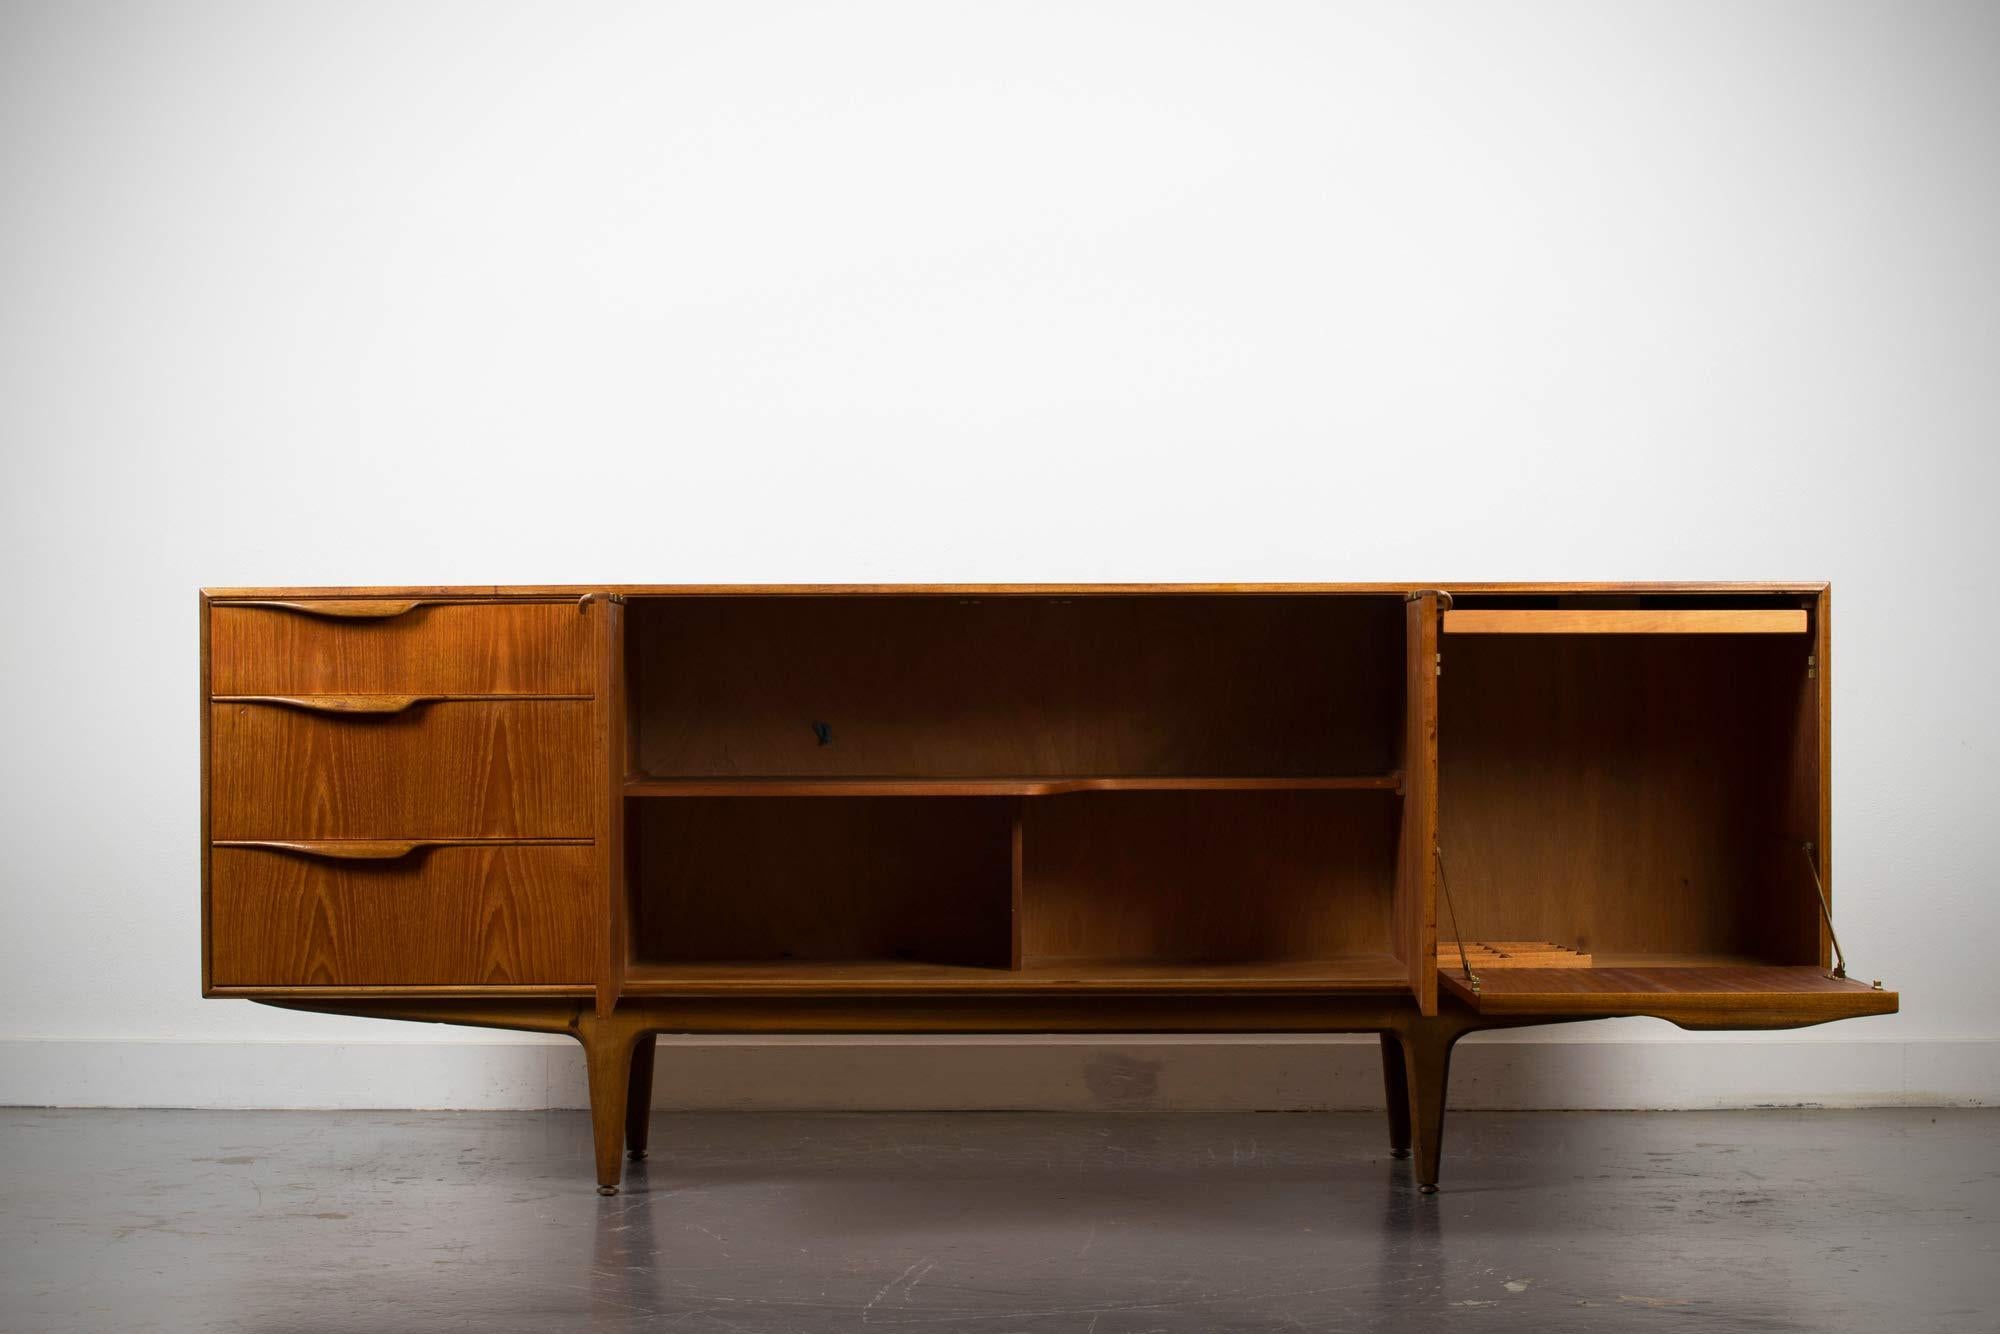 A stunning original vintage mid-1960s sideboard by McIntosh, model name Dunvegan.
It's a beautifully styled and high quality piece made using a mix of solid and veneered teak wood with a lovely grain, there's 3 drawers to the left side with the top